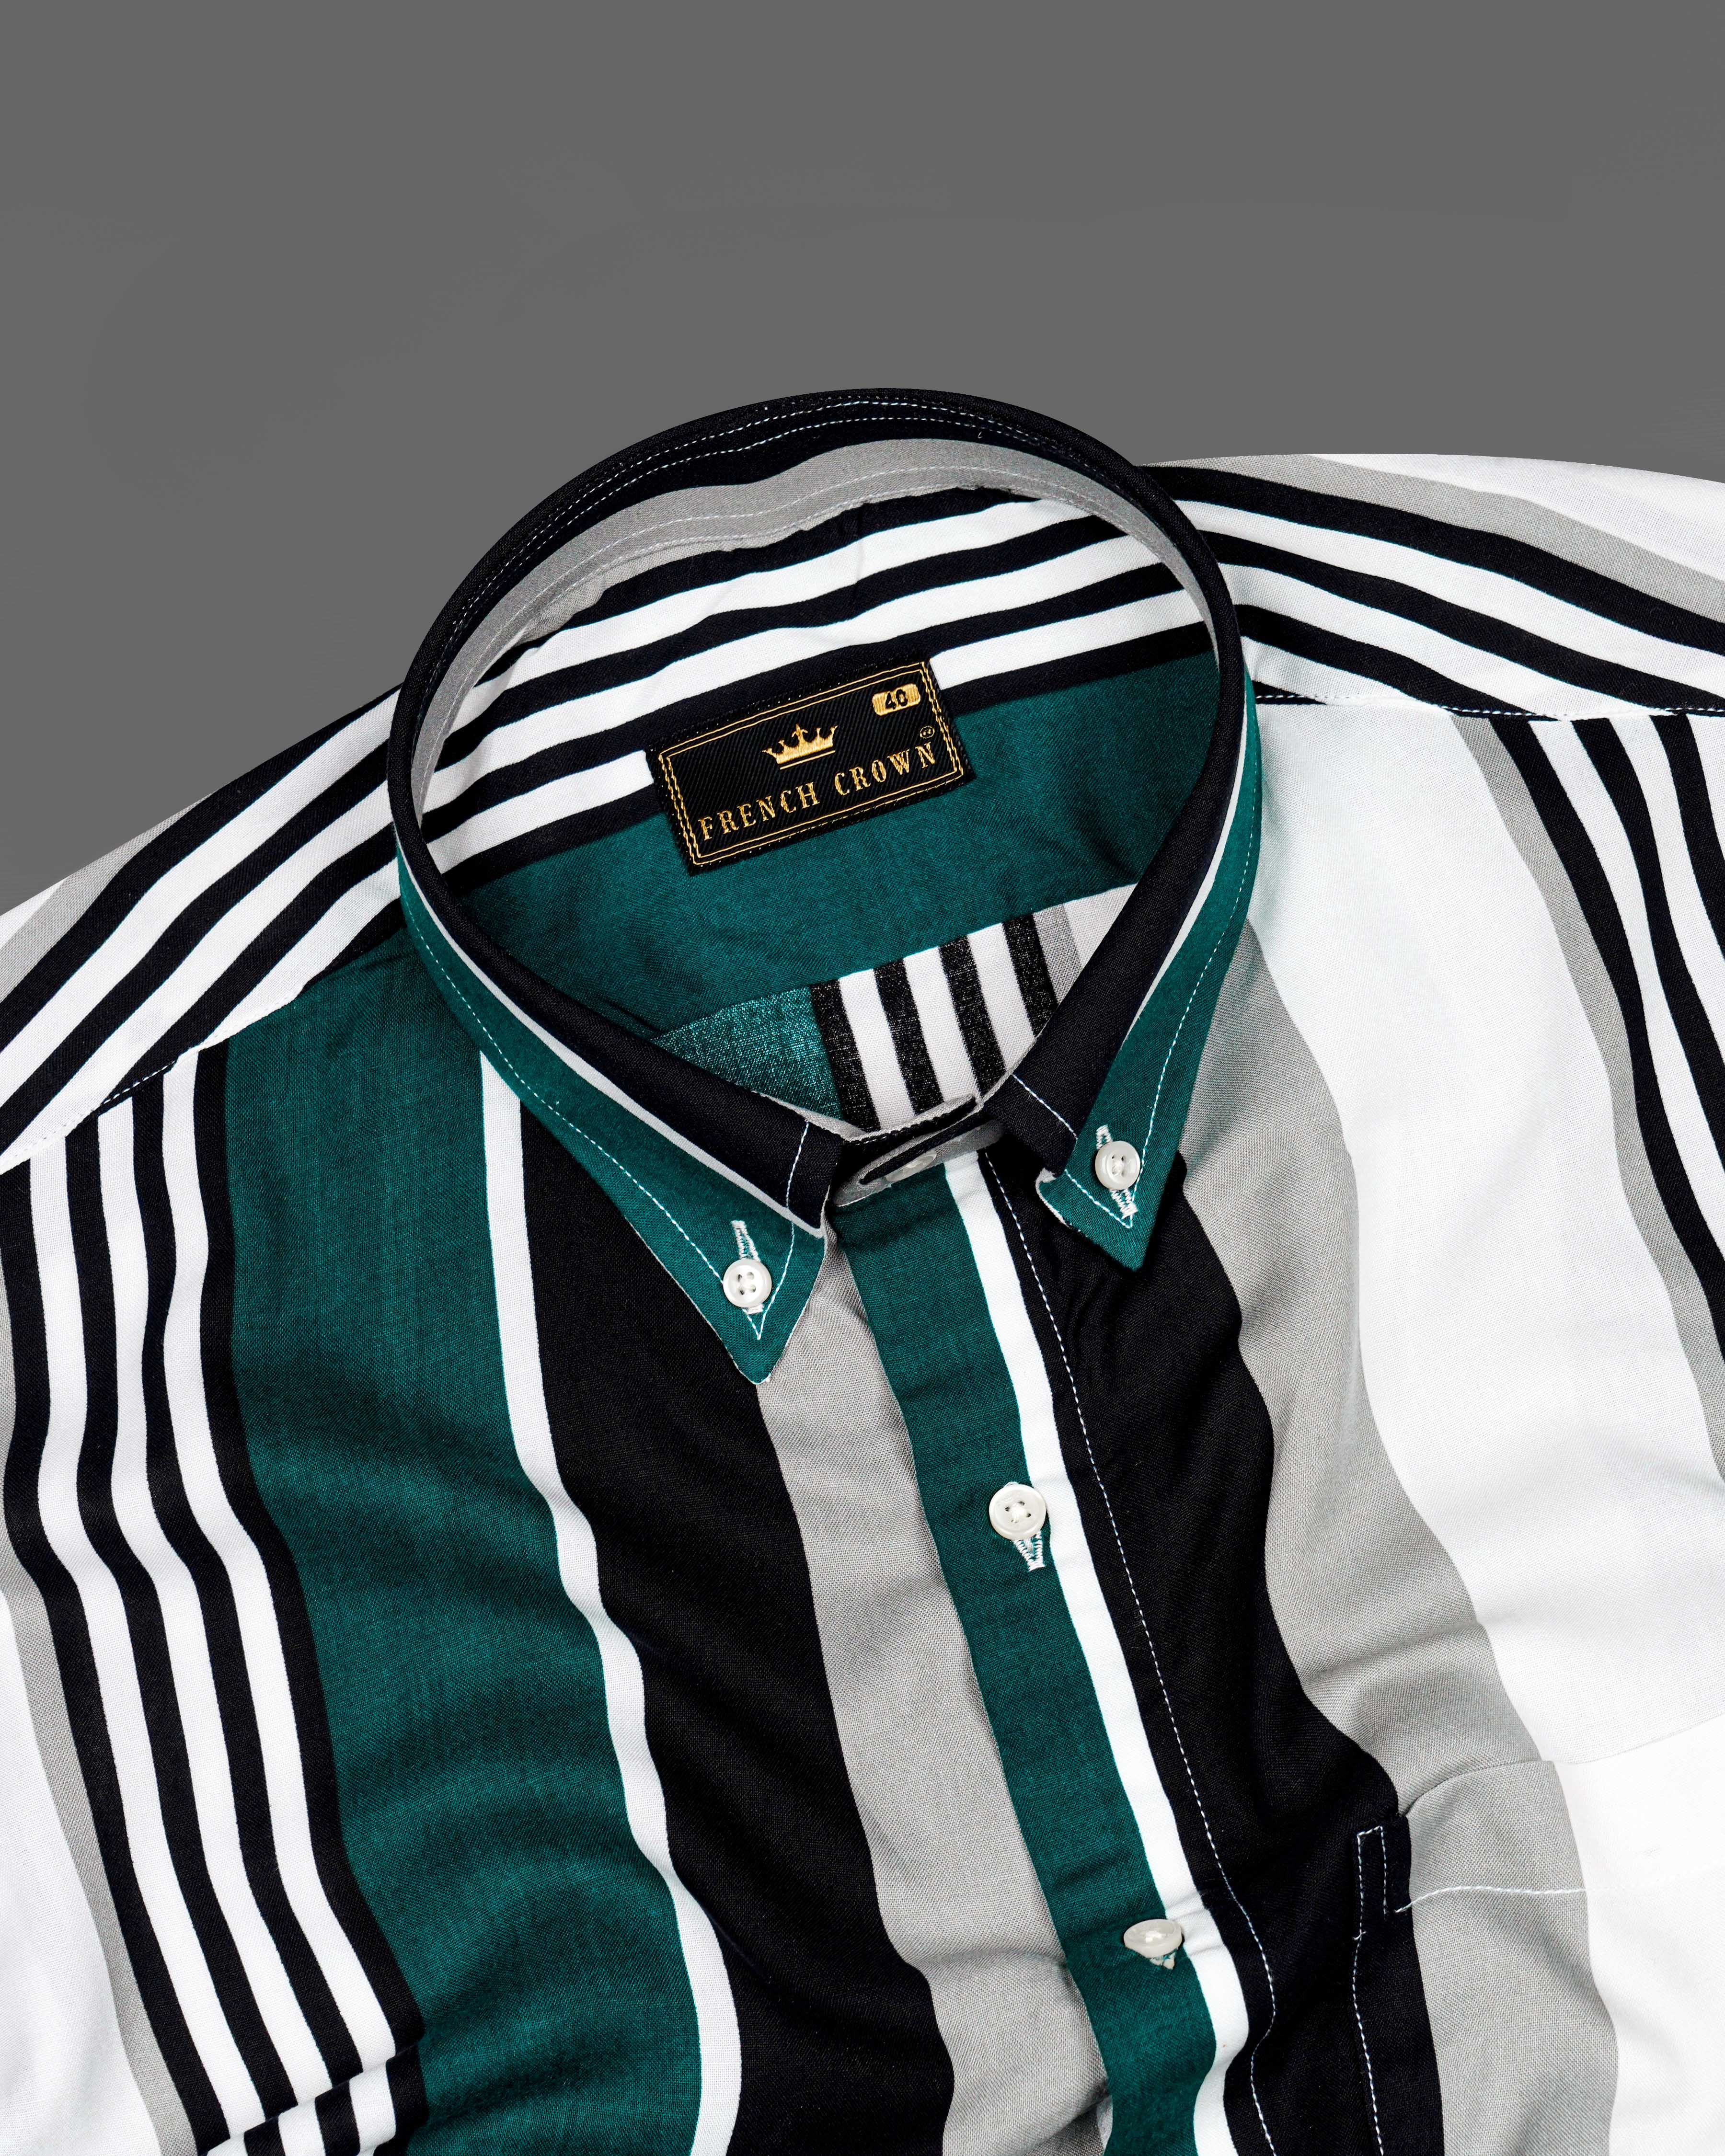 Daintree Green with Black and White Striped Premium Tencel Shirt  8611-BD-38,8611-BD-H-38,8611-BD-39,8611-BD-H-39,8611-BD-40,8611-BD-H-40,8611-BD-42,8611-BD-H-42,8611-BD-44,8611-BD-H-44,8611-BD-46,8611-BD-H-46,8611-BD-48,8611-BD-H-48,8611-BD-50,8611-BD-H-50,8611-BD-52,8611-BD-H-52